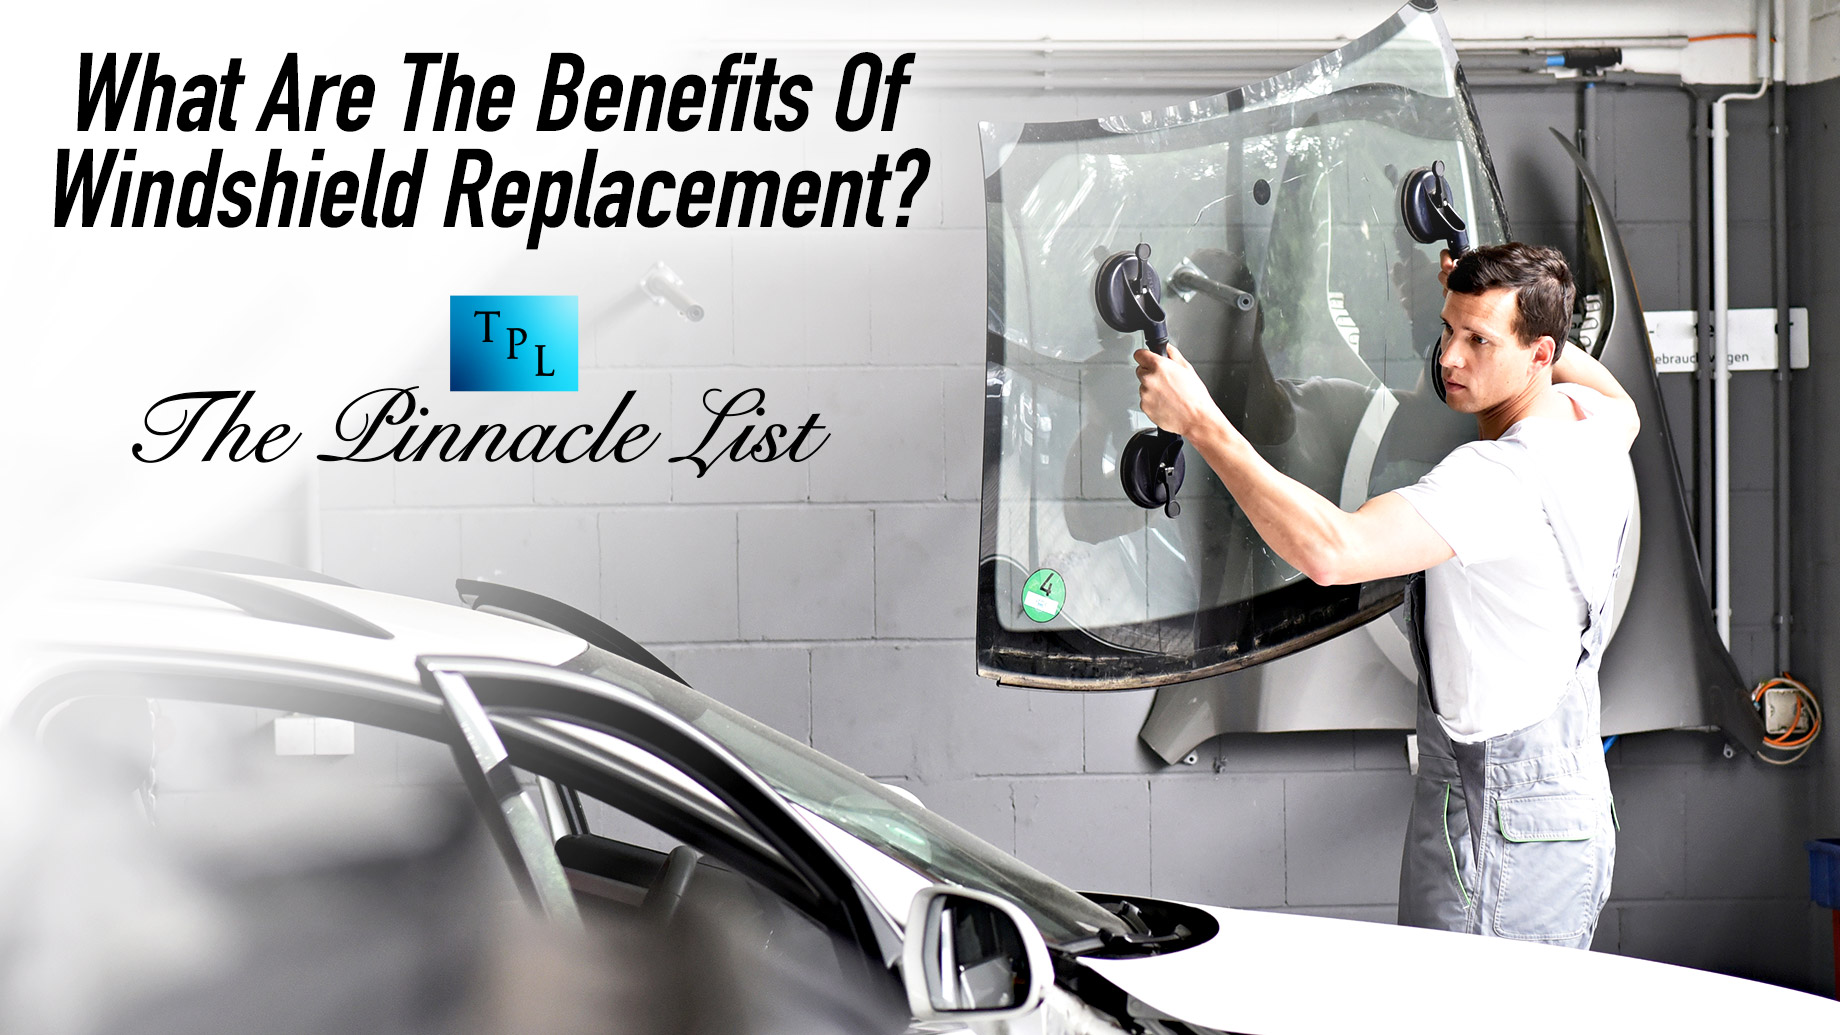 What Are The Benefits Of Windshield Replacement?